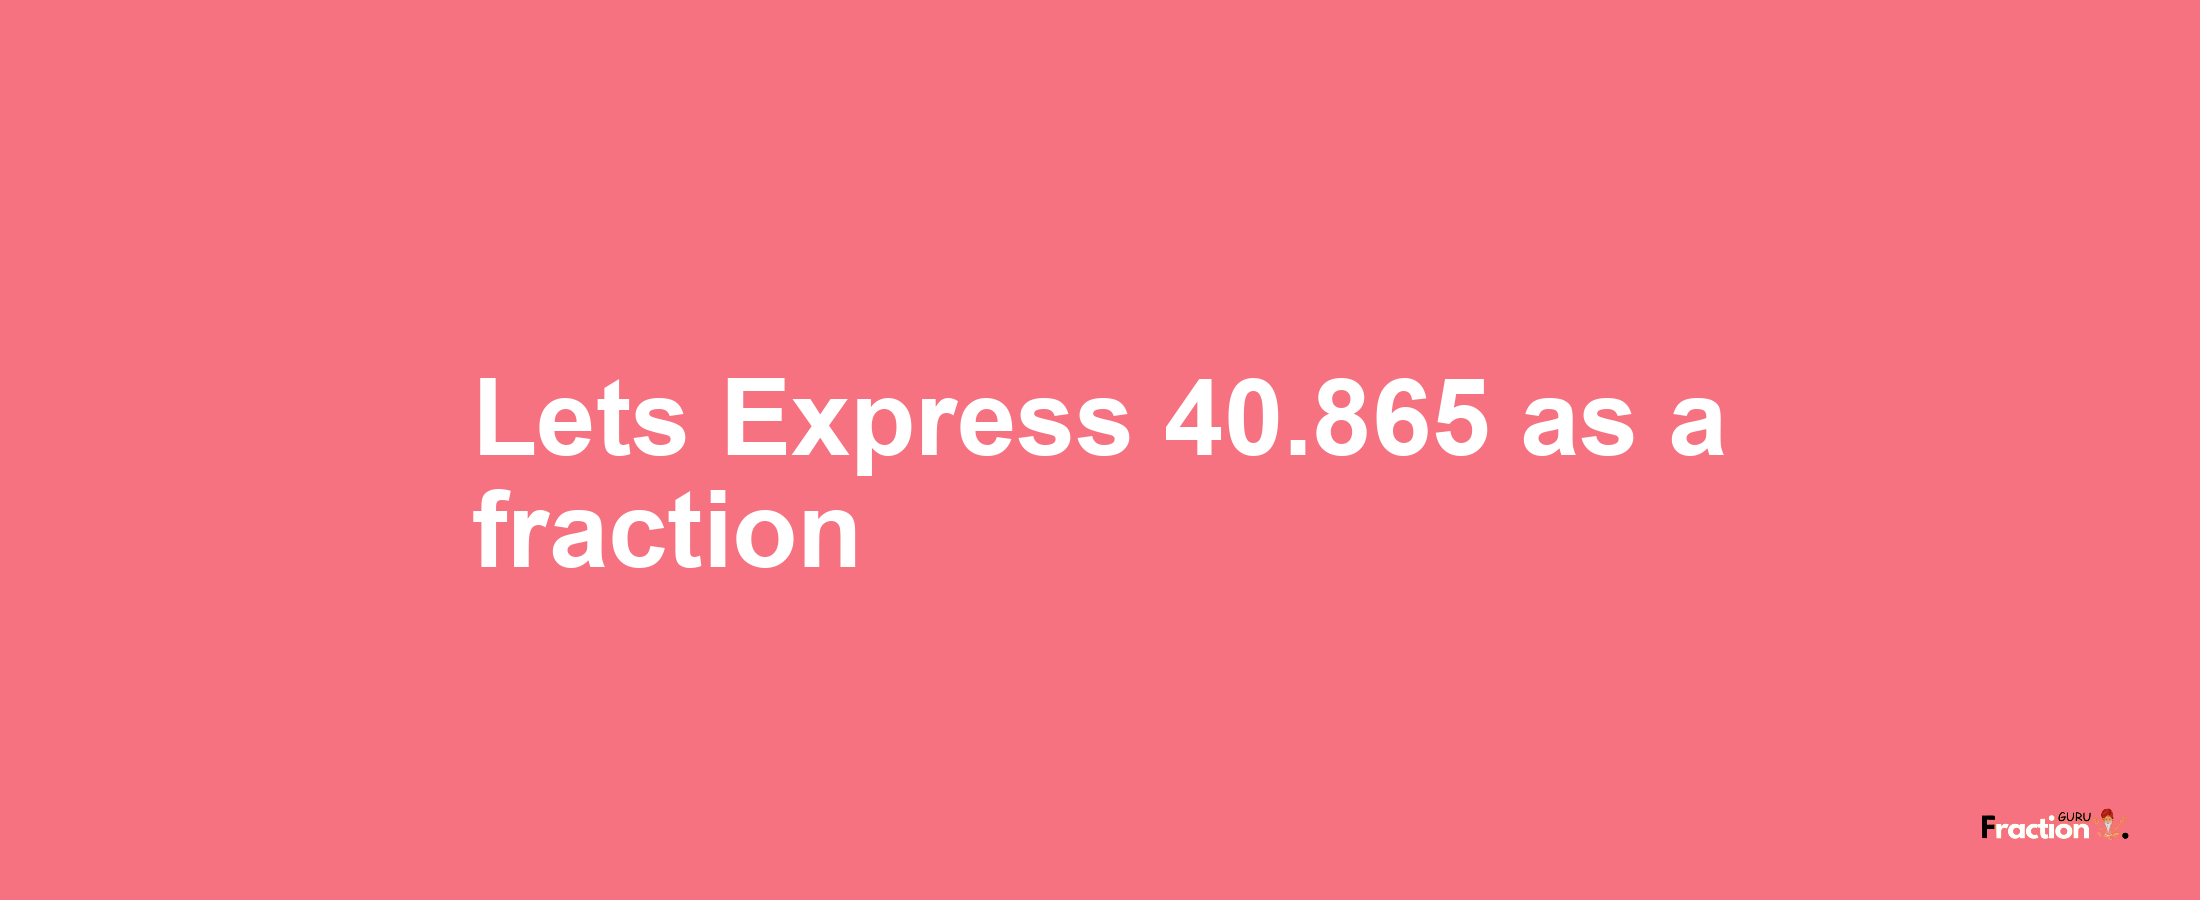 Lets Express 40.865 as afraction